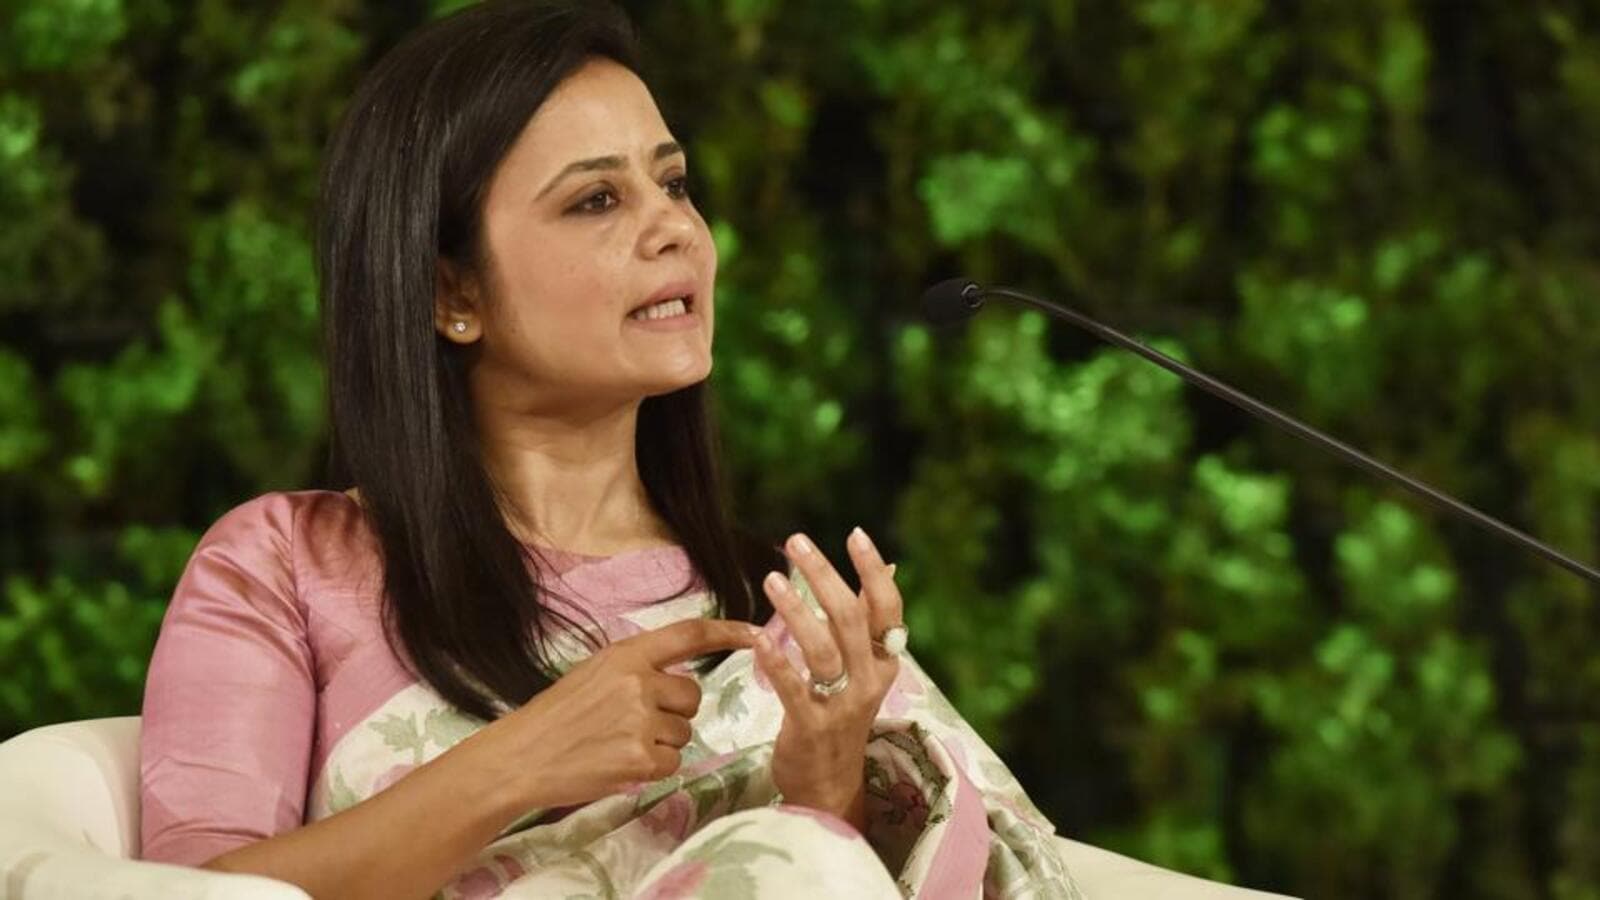 Unfazed by FIR over Kaali remark Mahua Moitra dares BJP: 'Bring it on!' -  Rediff.com